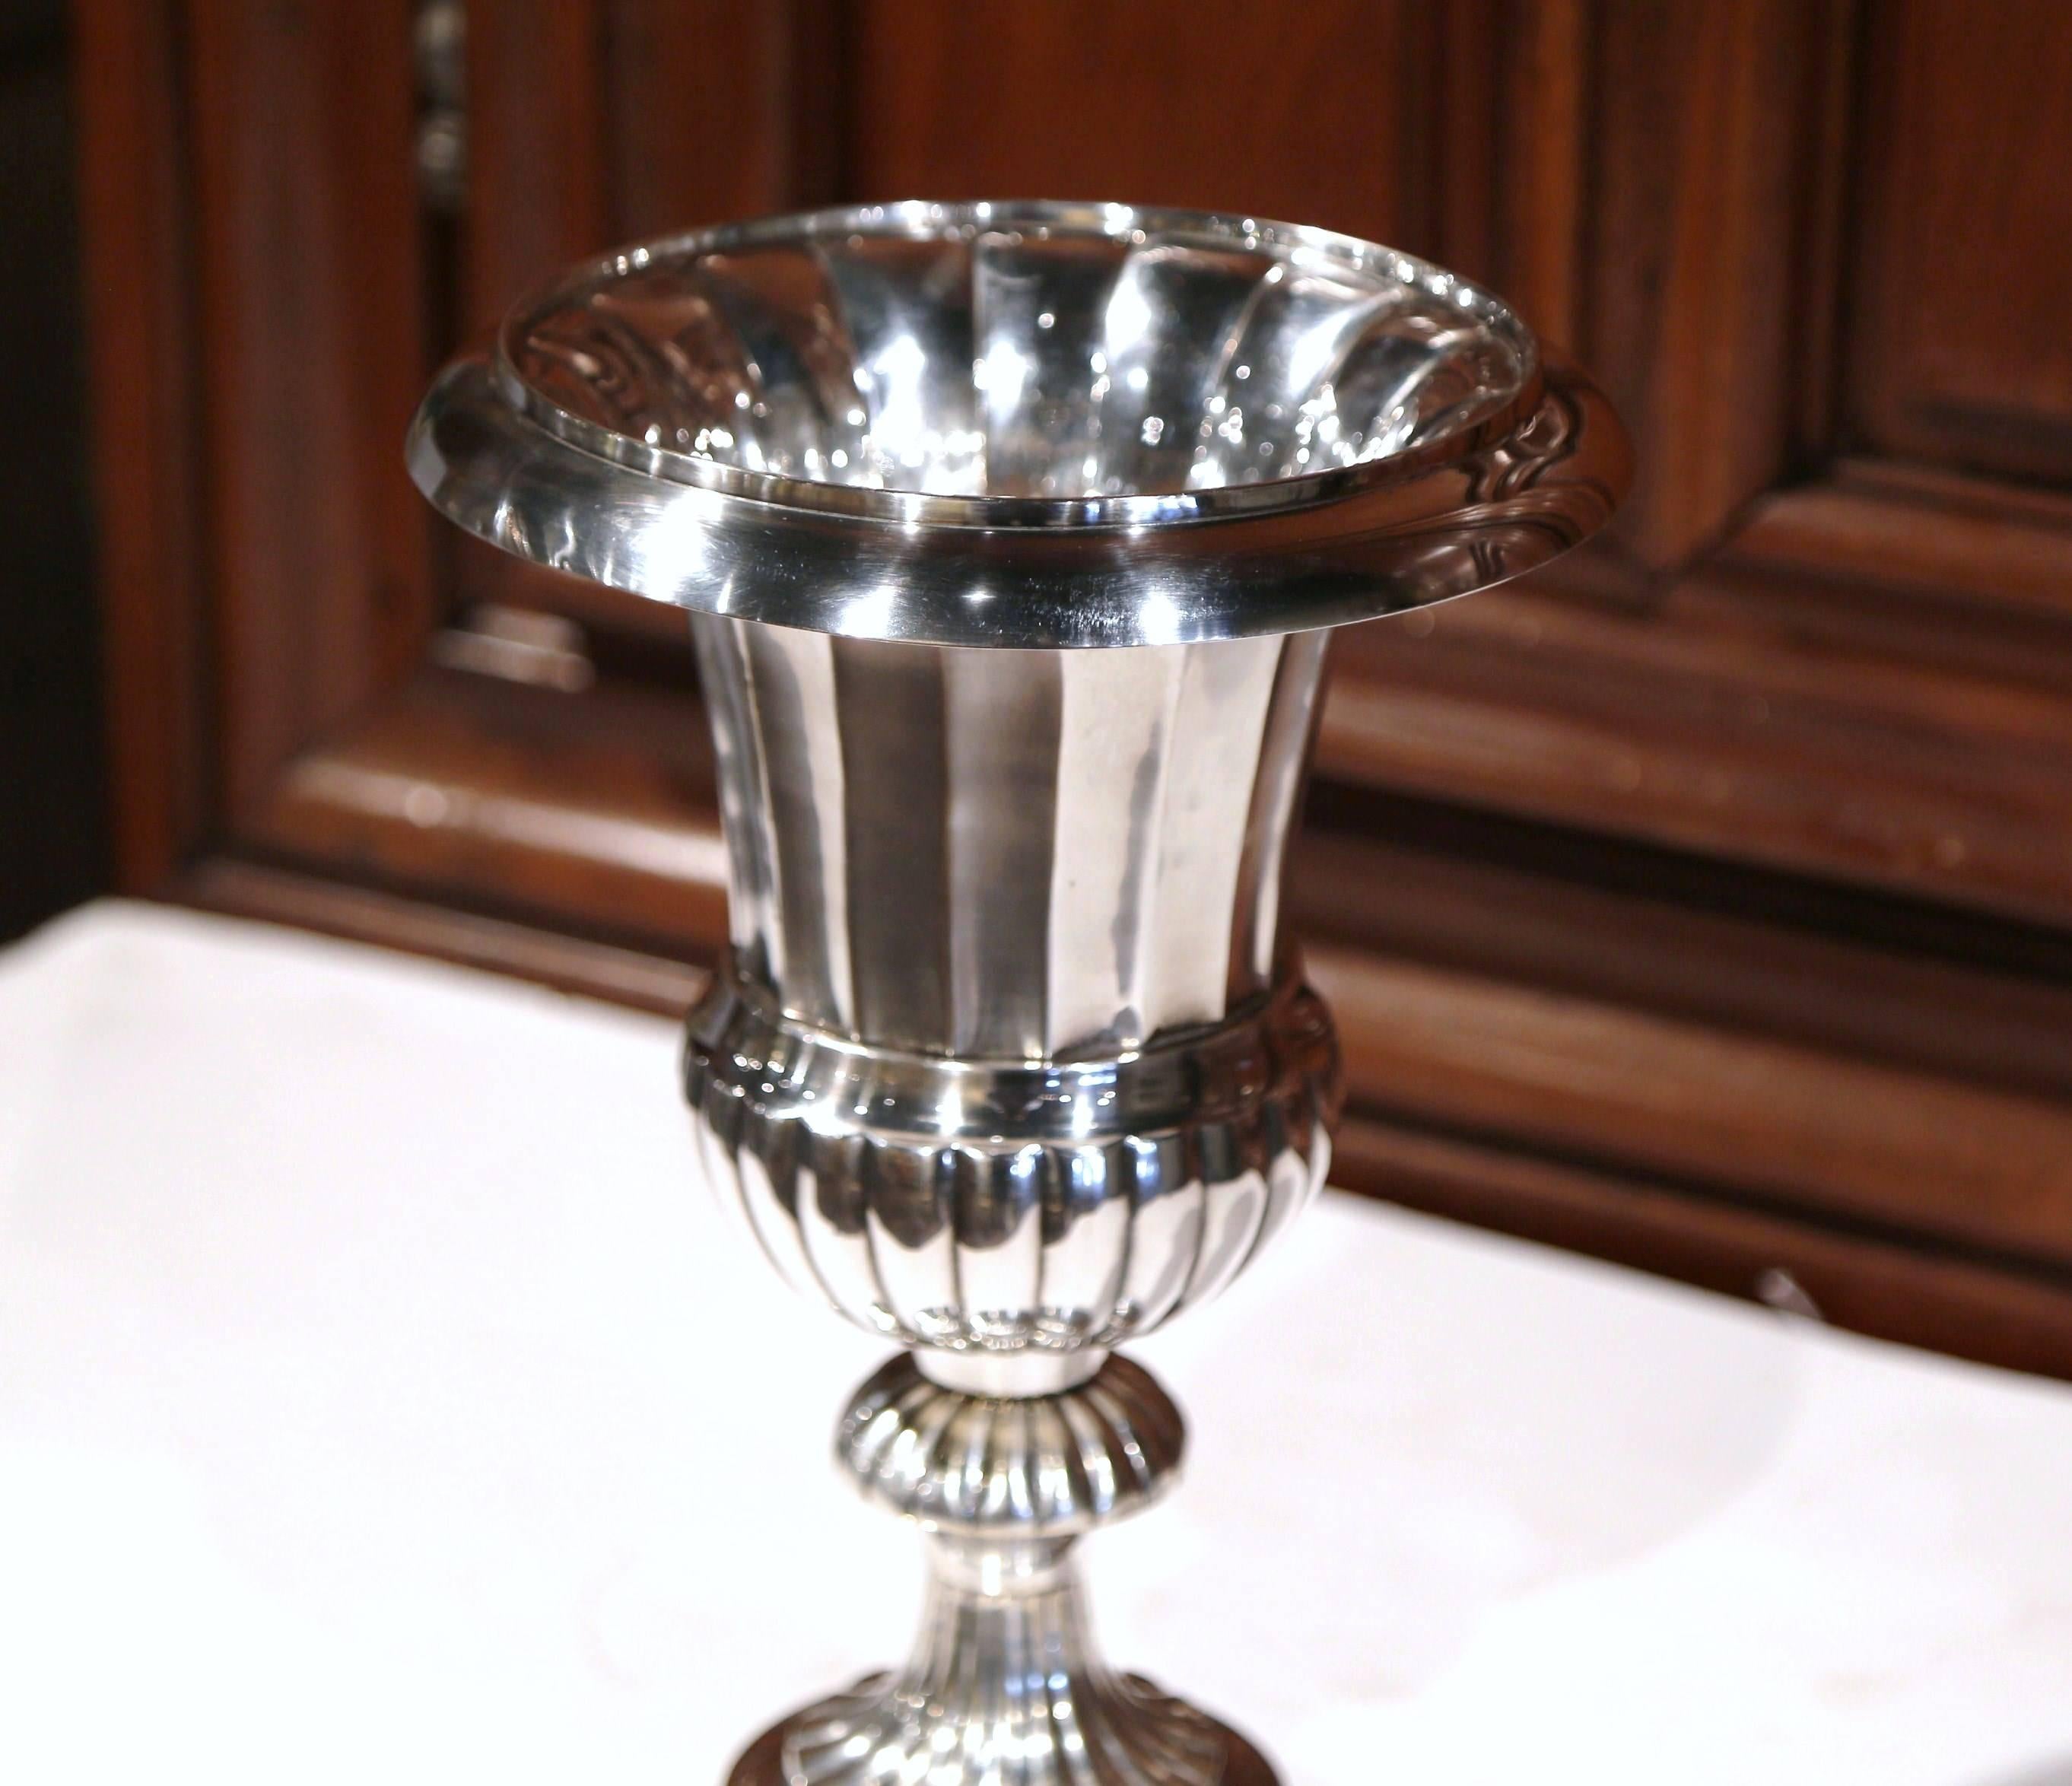 Early 20th Century English Silver Plated Champagne Bucket with Engraved Markings 1